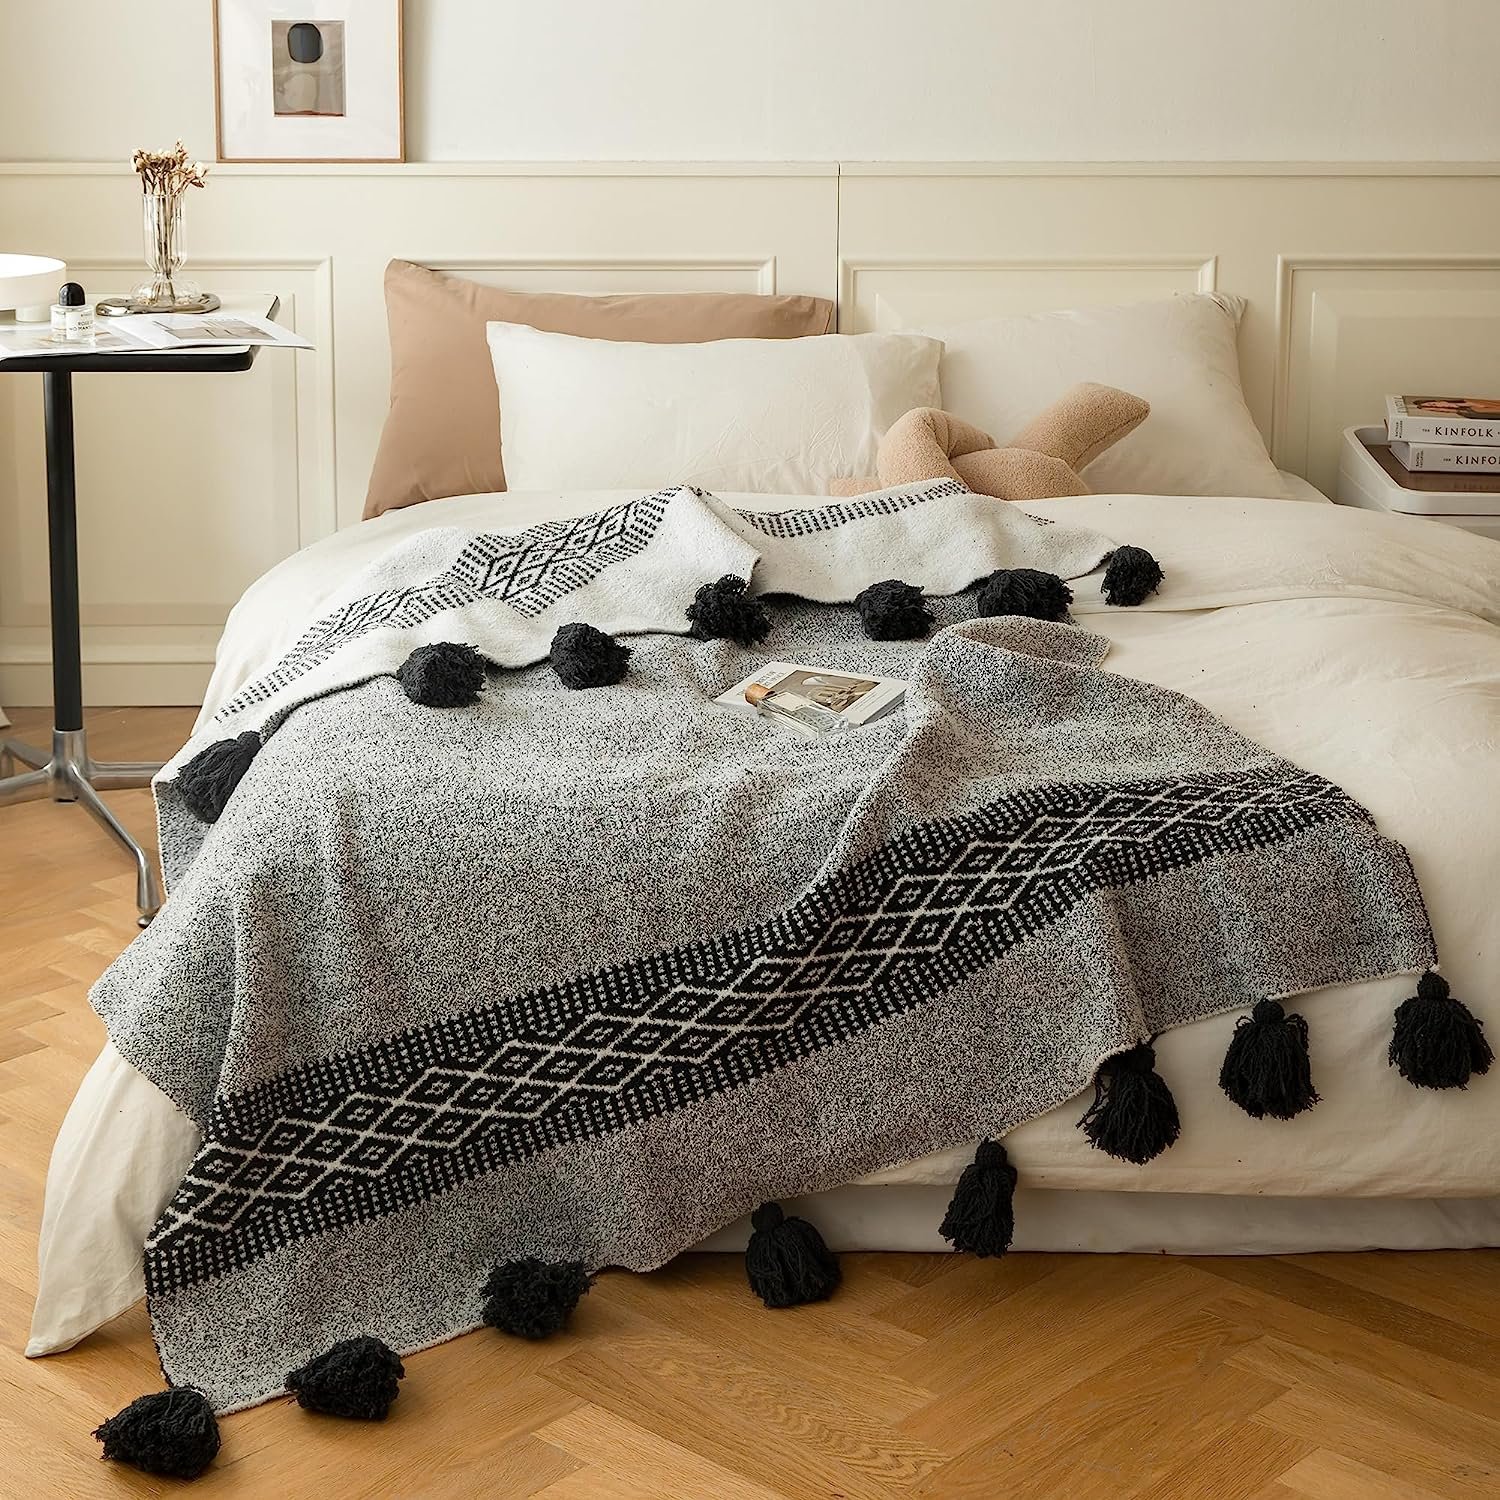 vintage knitted black and white geometric patterned throw with tassels.jpg